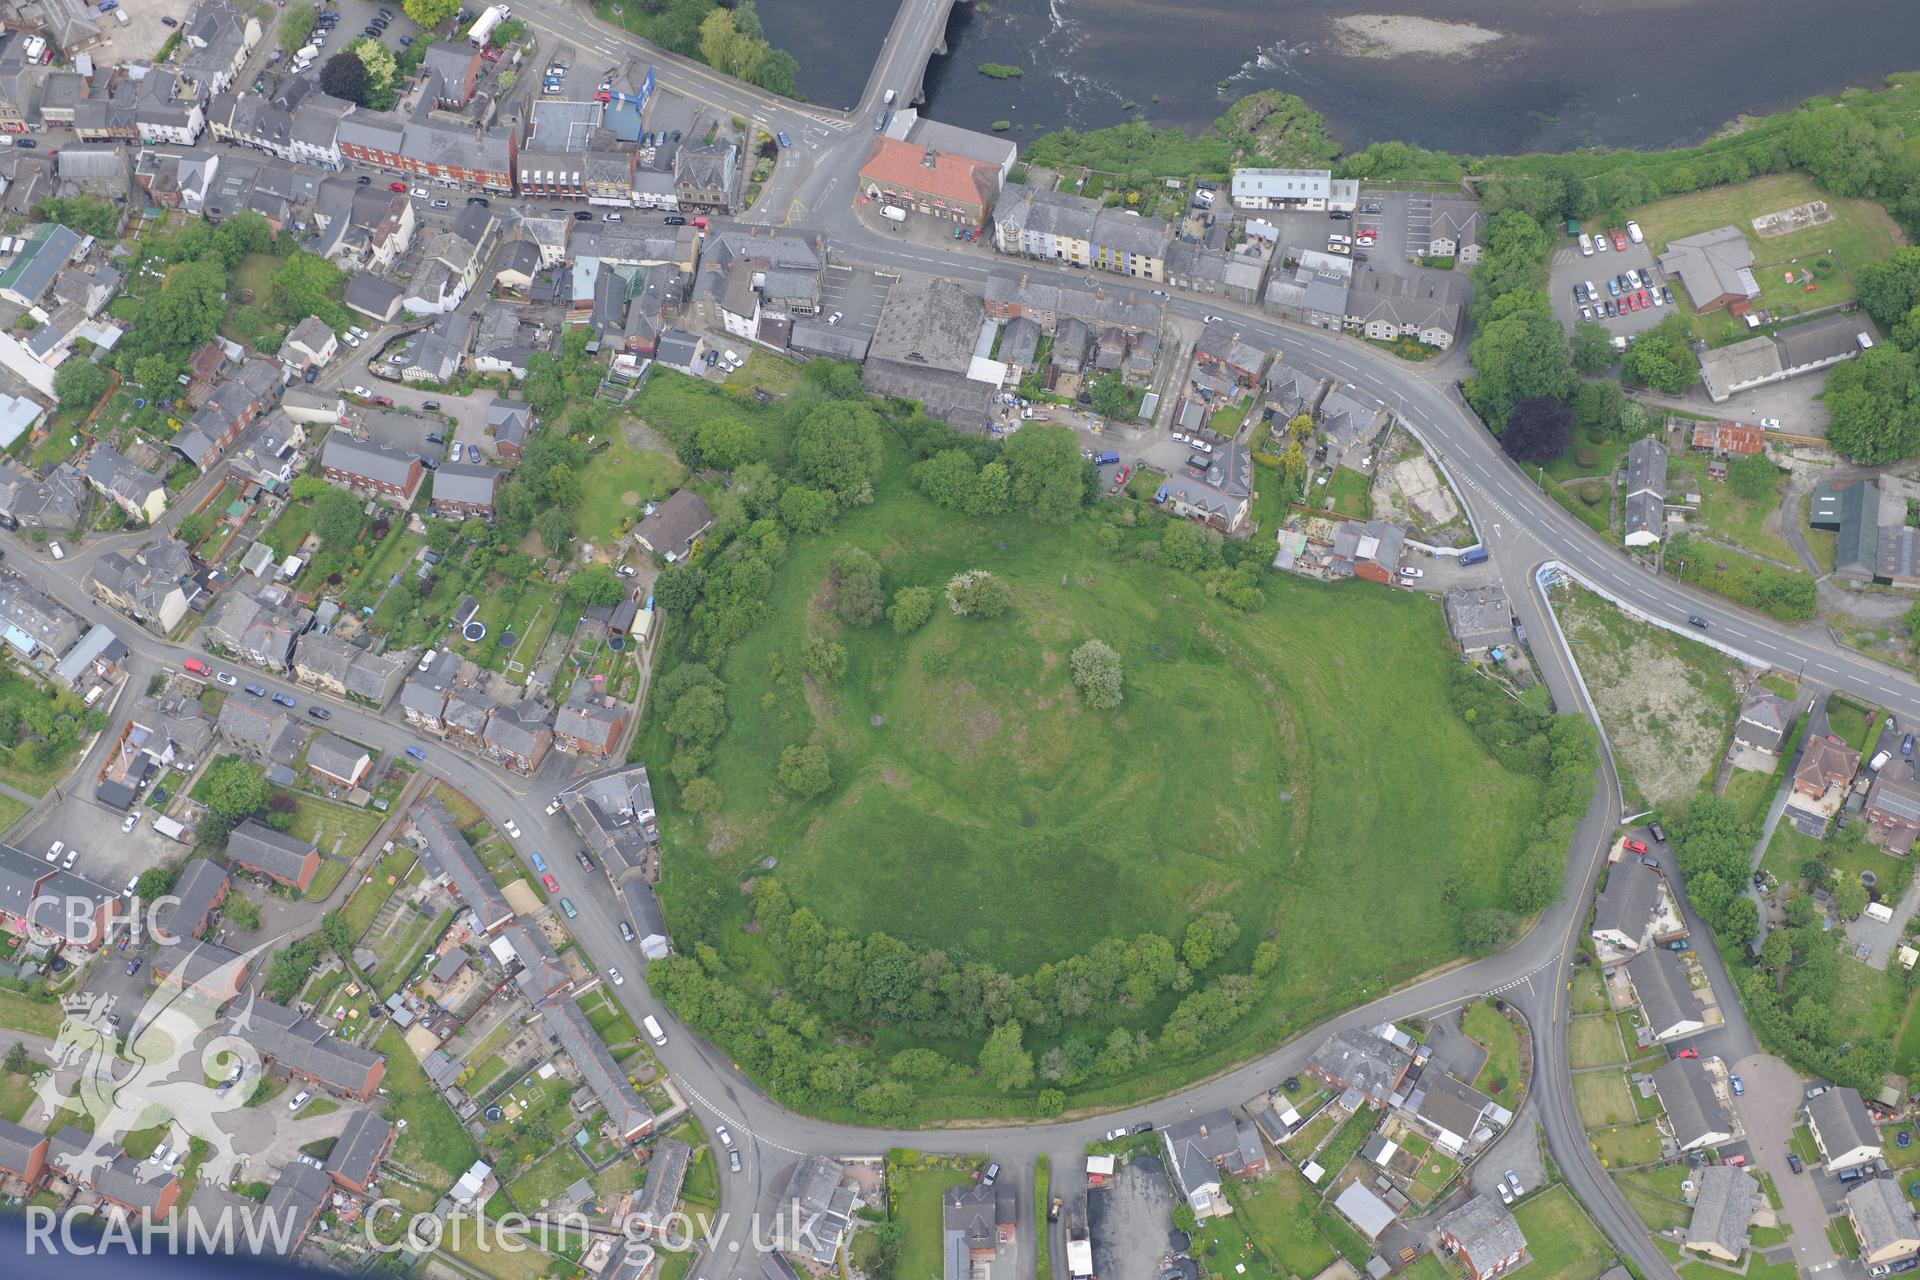 Builth Wells including views of Builth Castle and Builth Wells Market Hall. Oblique aerial photograph taken during the Royal Commission's programme of archaeological aerial reconnaissance by Toby Driver on 11th June 2015.